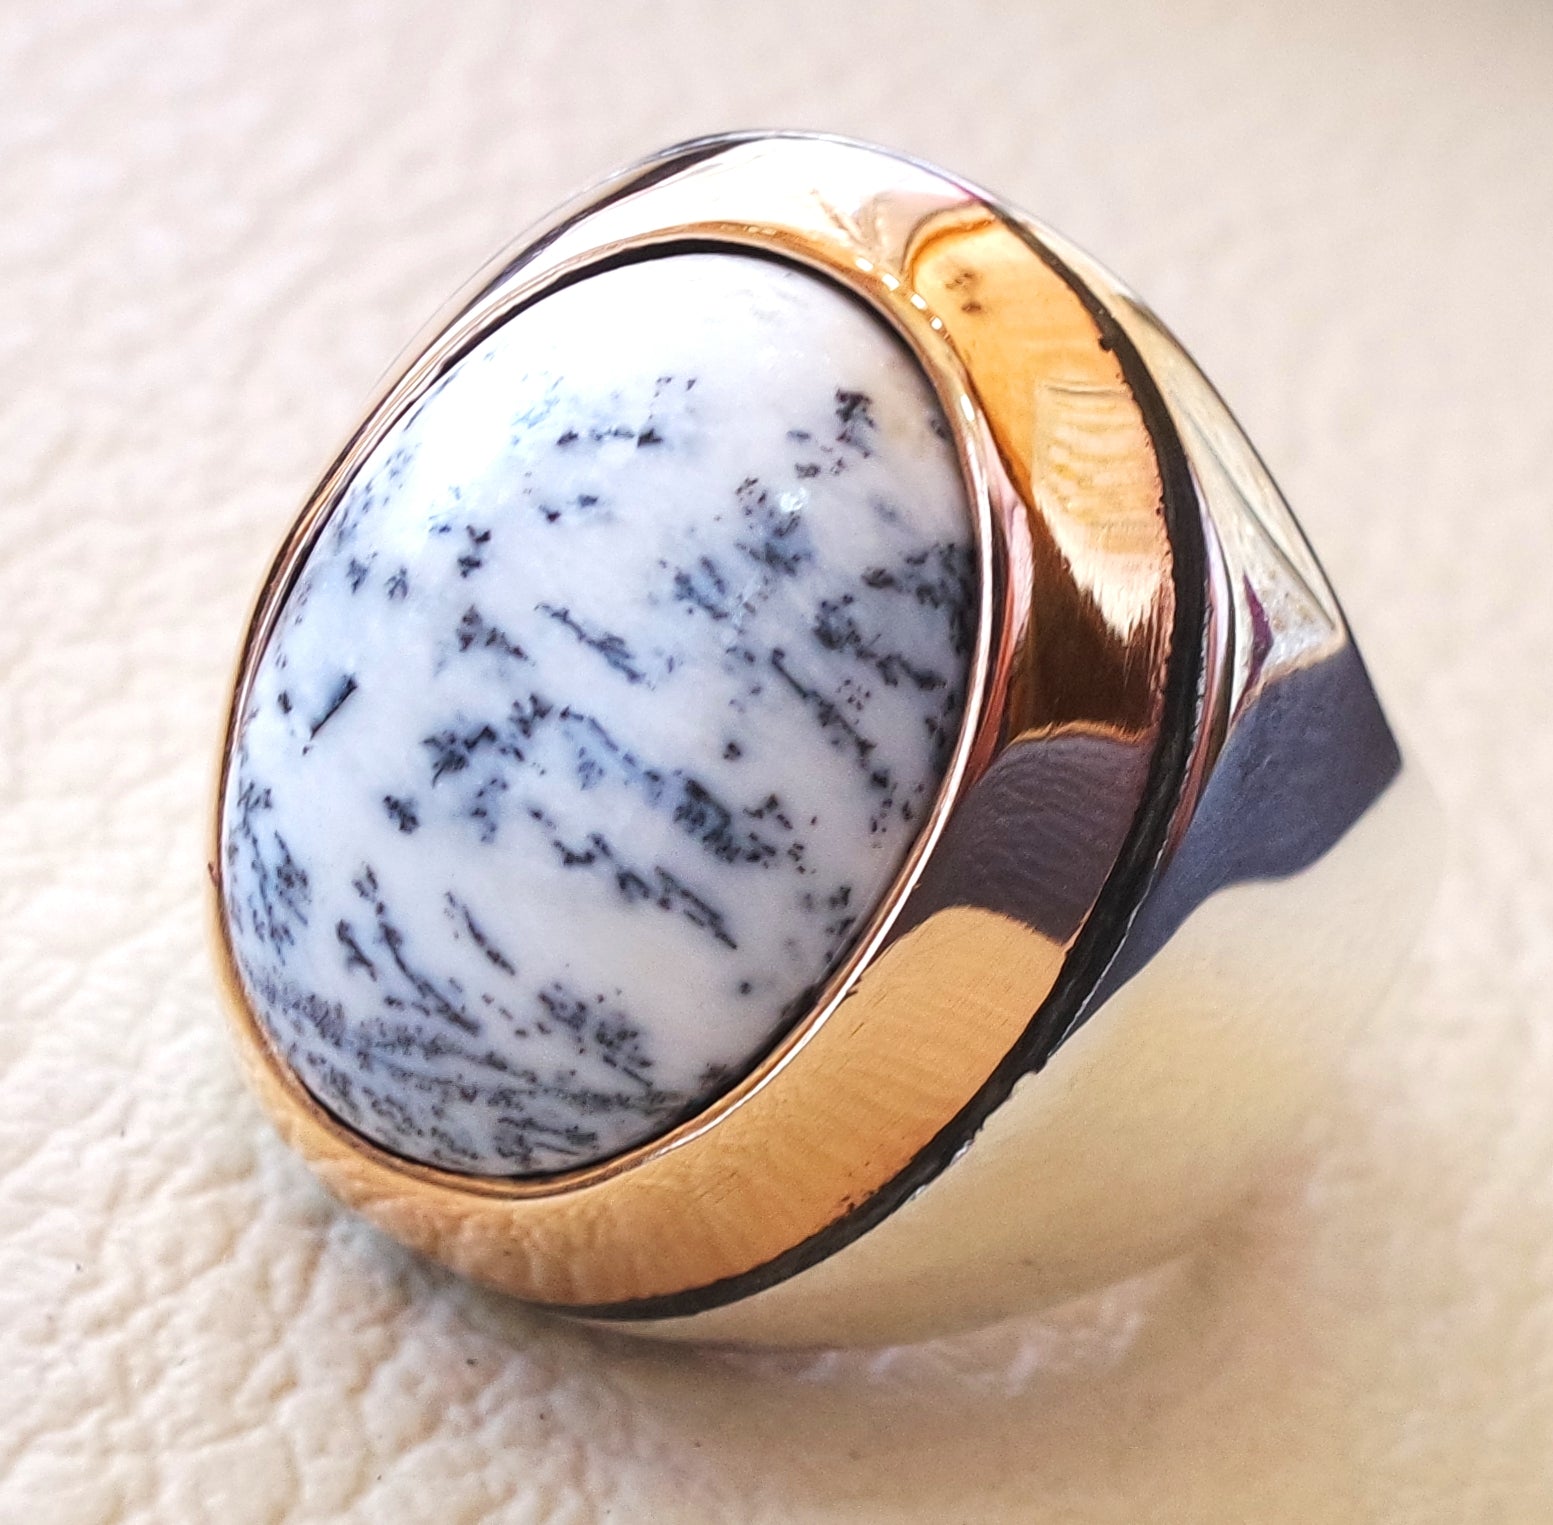 Men ring Dendritic opal agate natural stone sterling silver 925 and bronze ottoman turkey middle eastern antique style any size